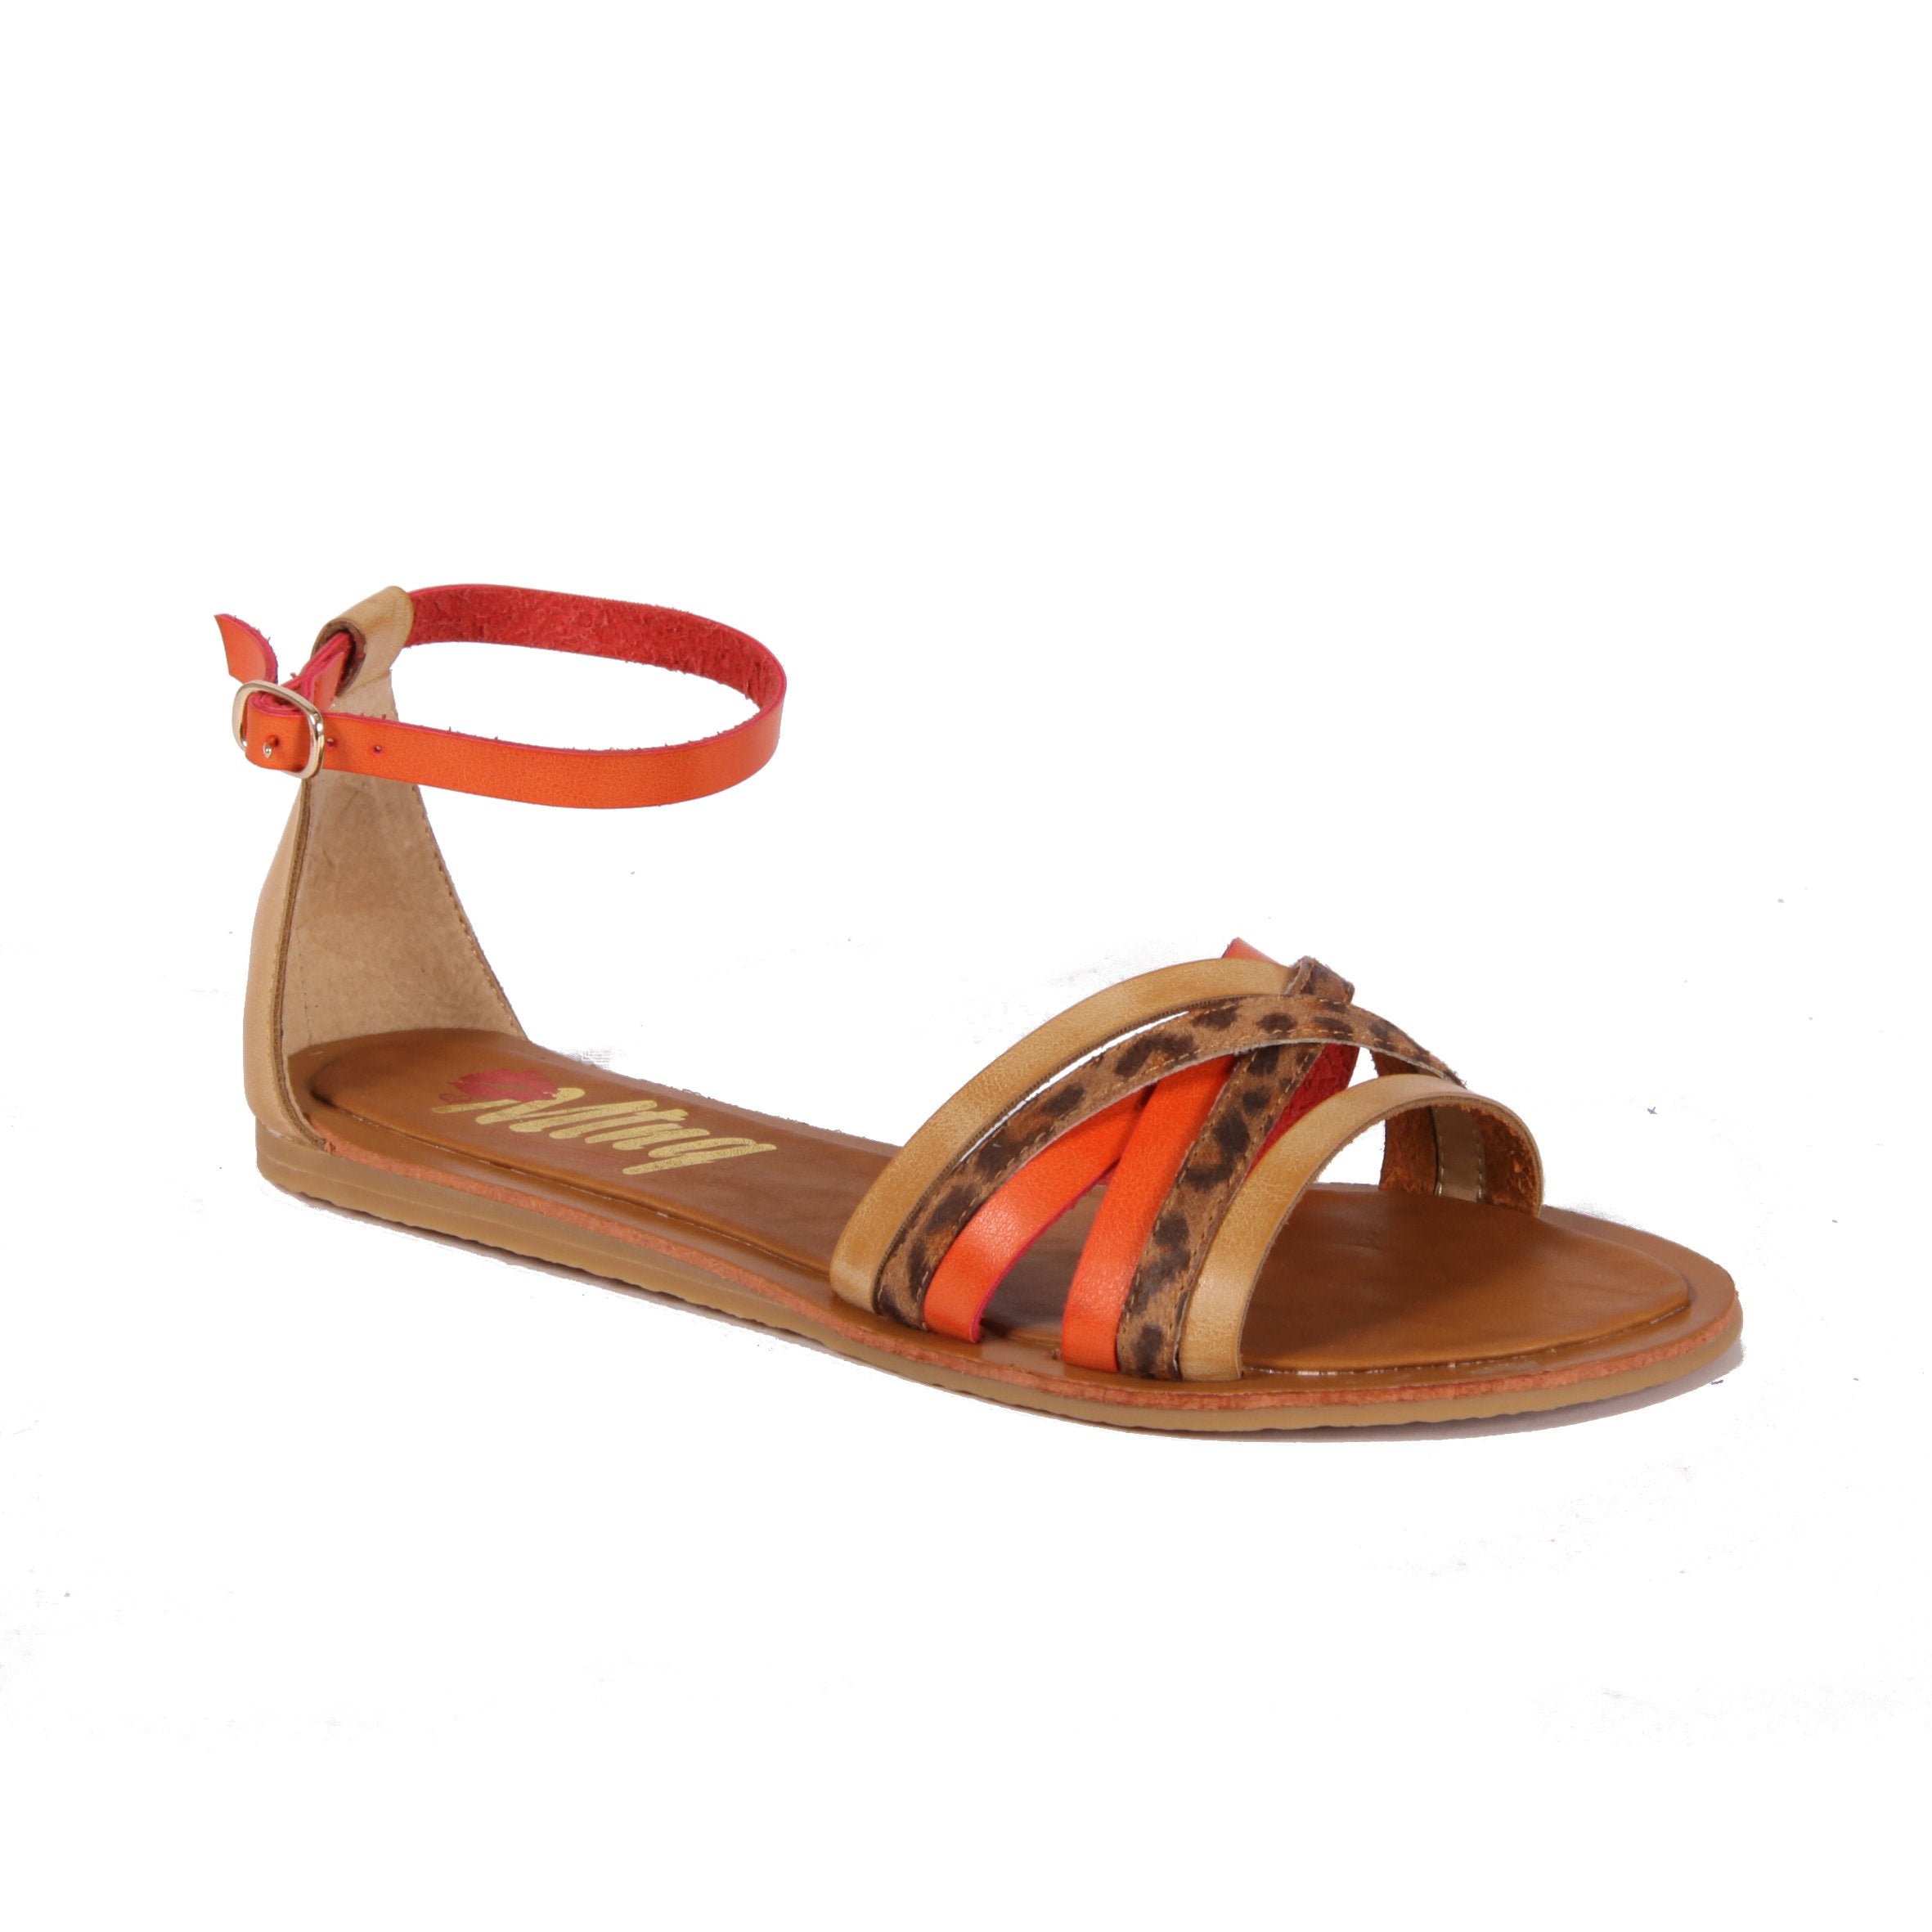 MNTG Vache Tiger Print Sandals - elevate your sole